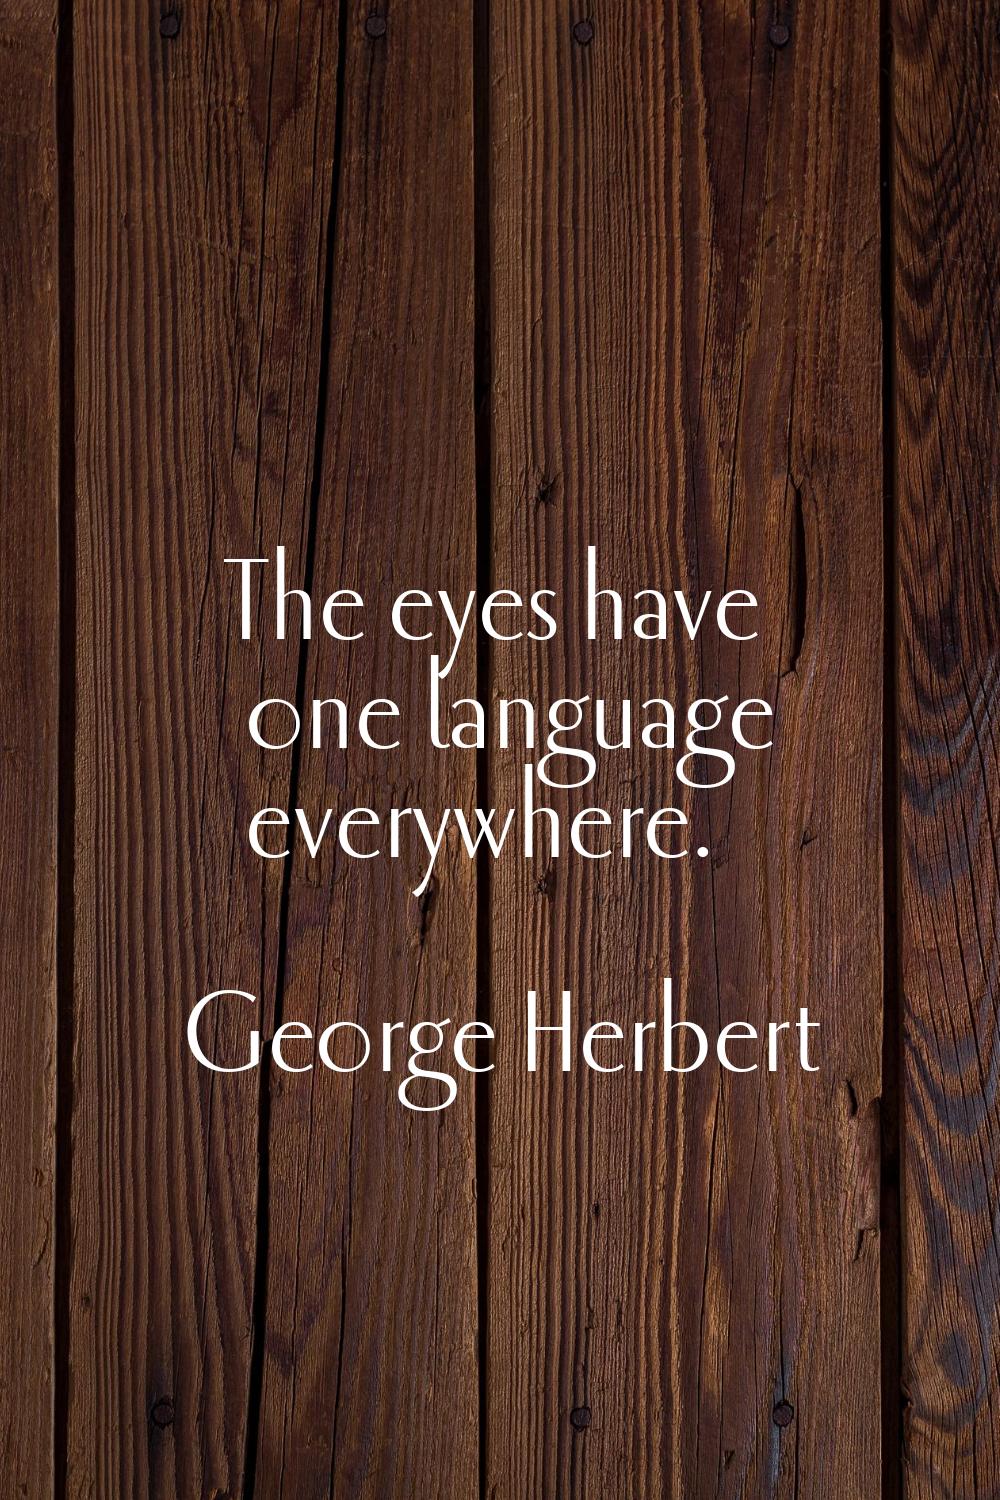 The eyes have one language everywhere.